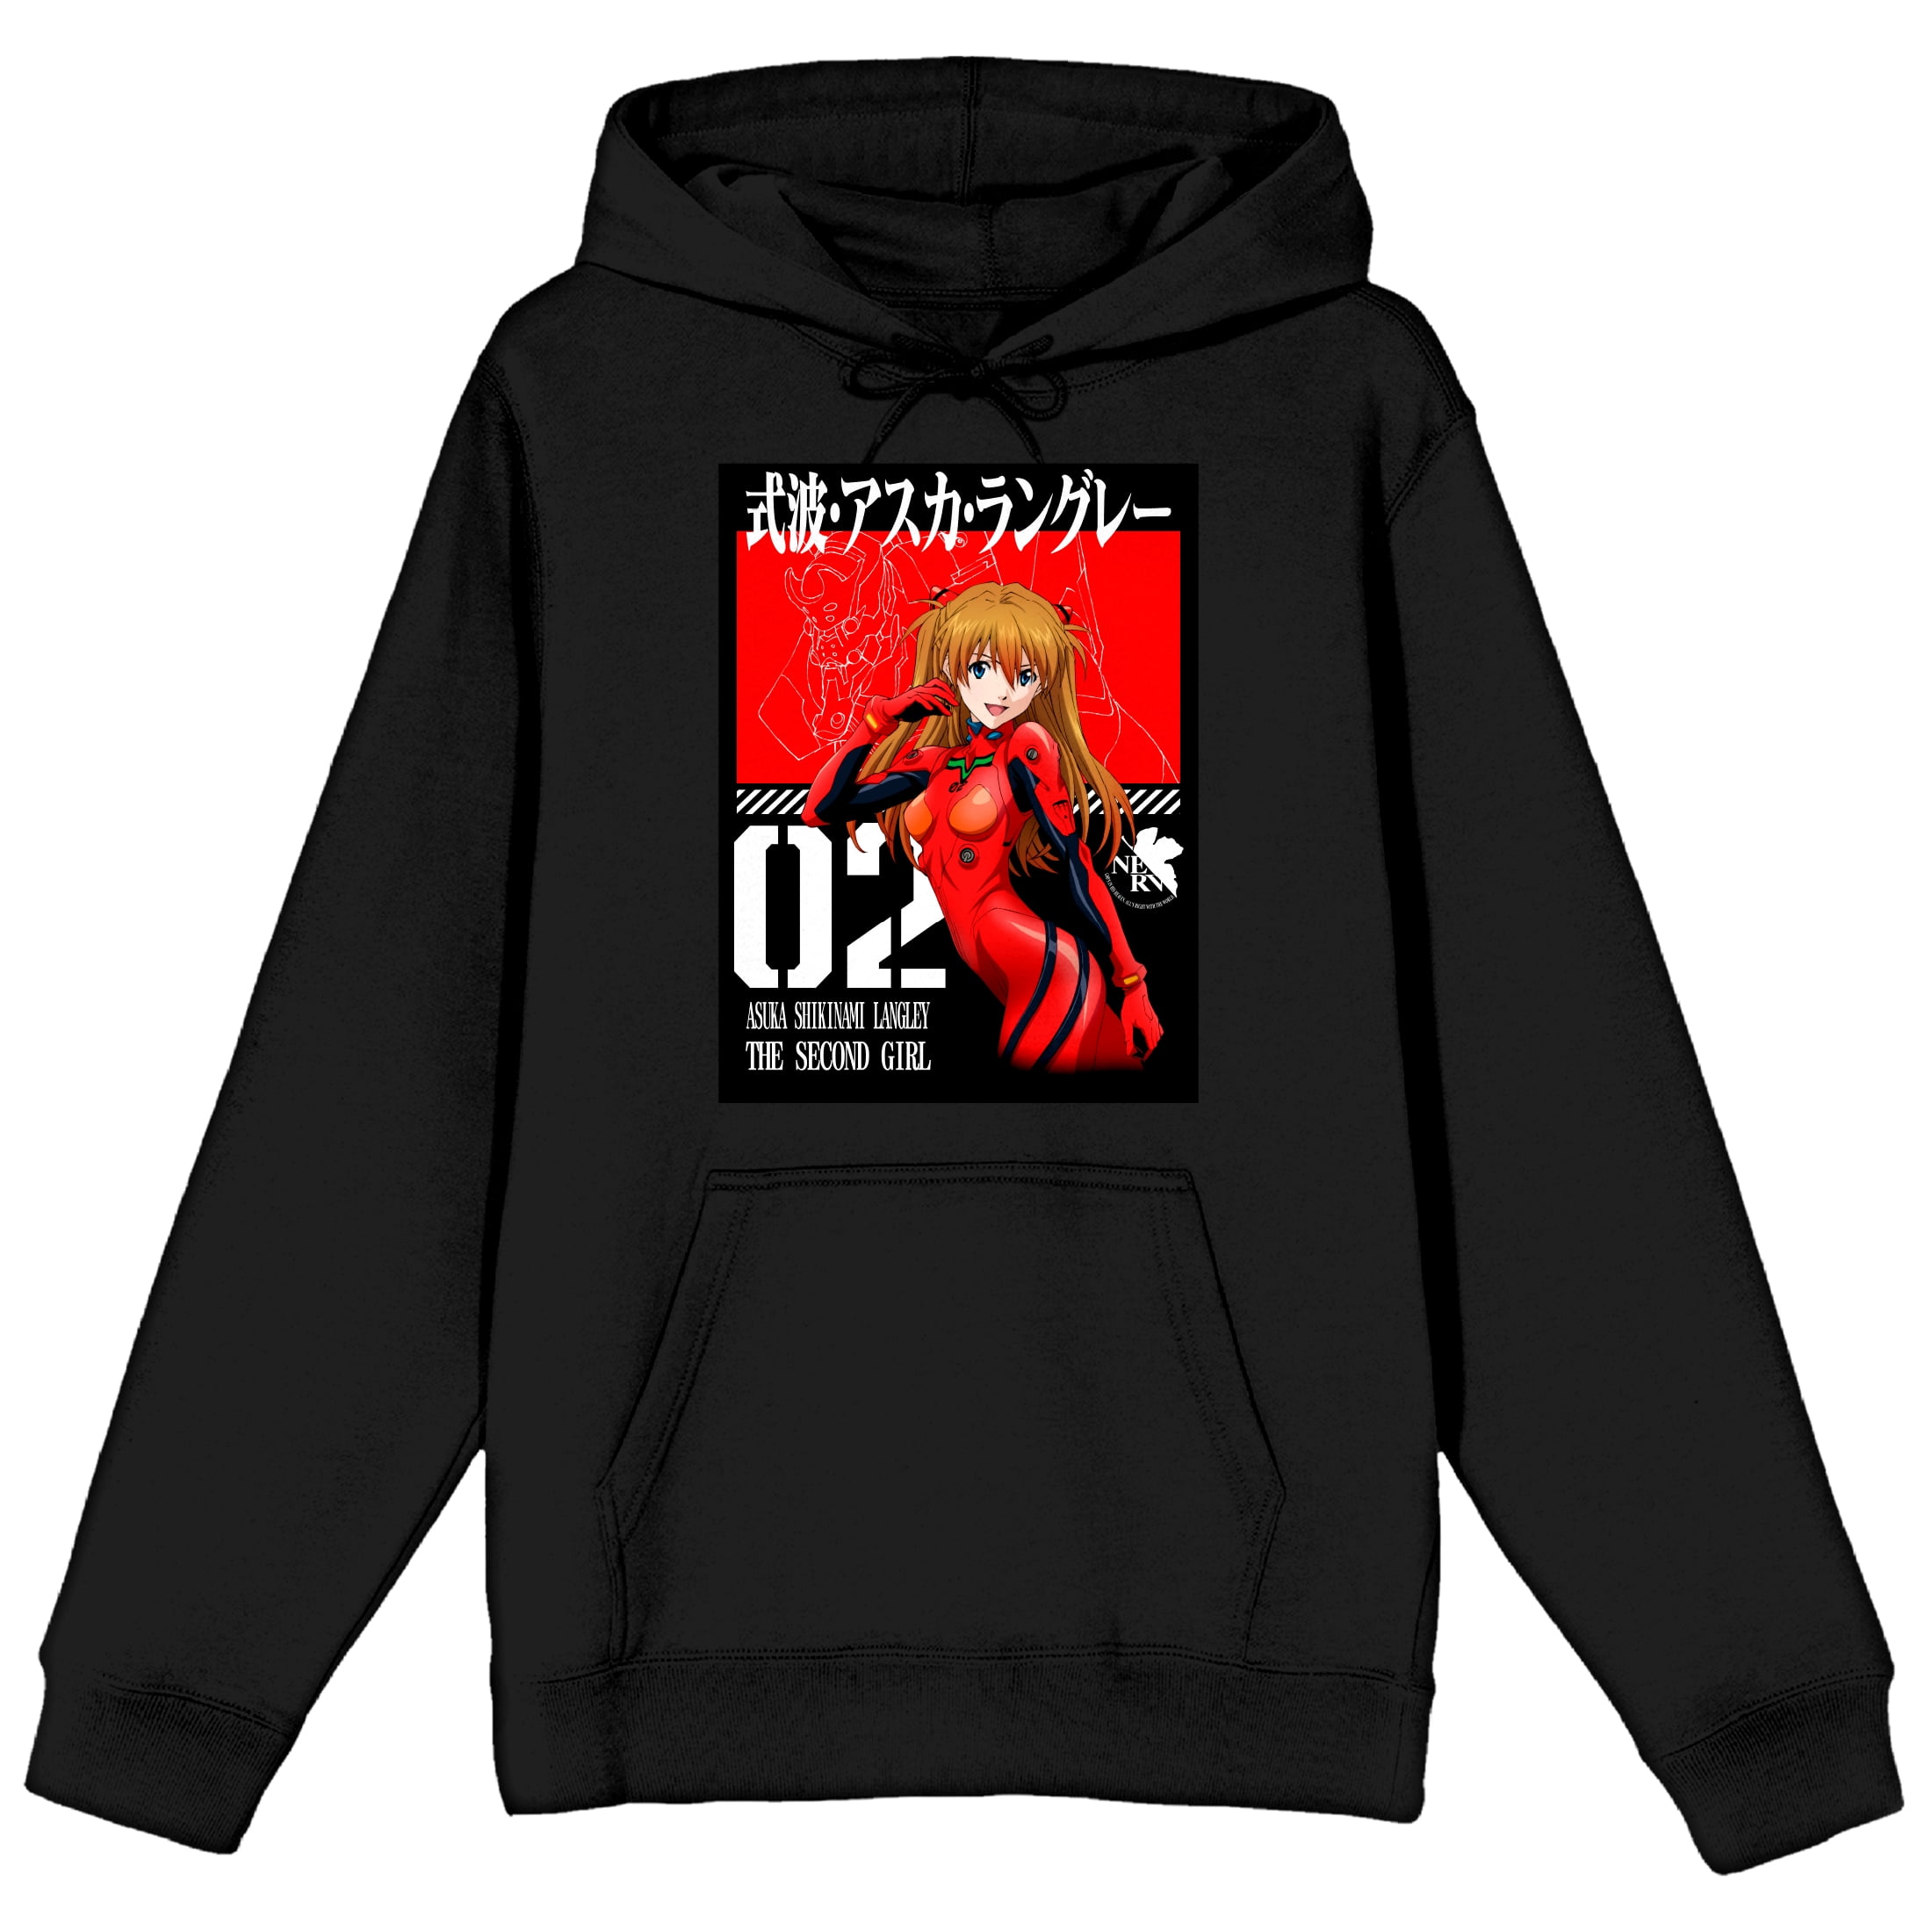 Anime high school Dxd Unisex Long Sleeve Hoodie Coat Pullover Tops S-3XL#11 